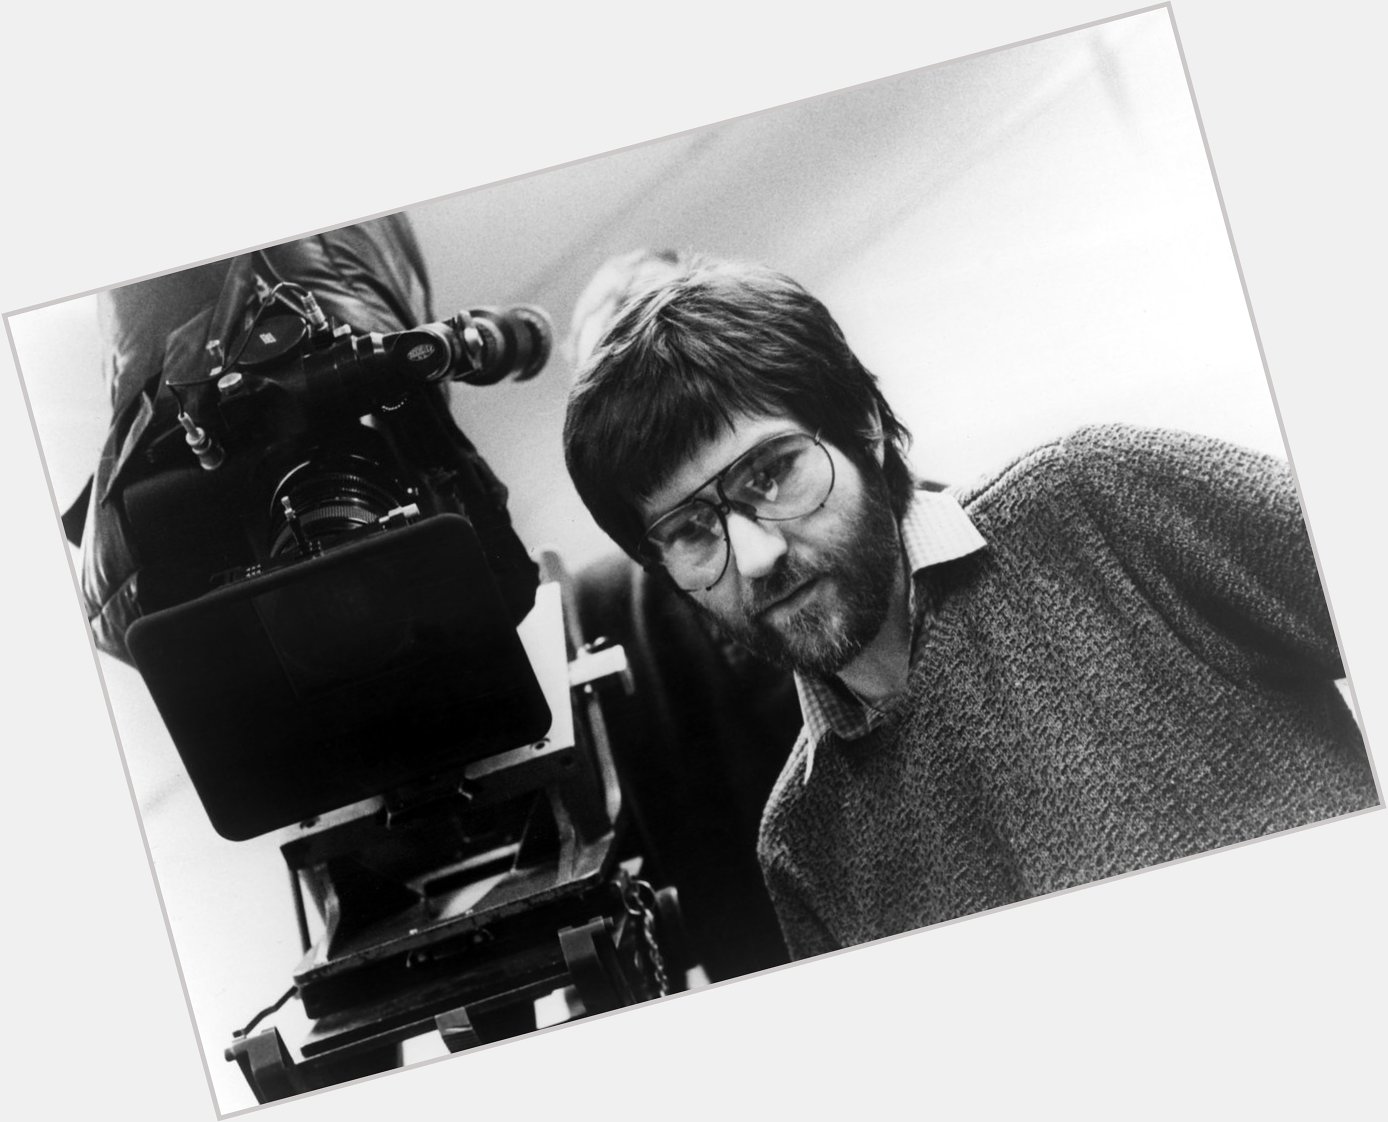 Tobe Hooper would have been 76 today.
Happy Birthday, we miss you! 